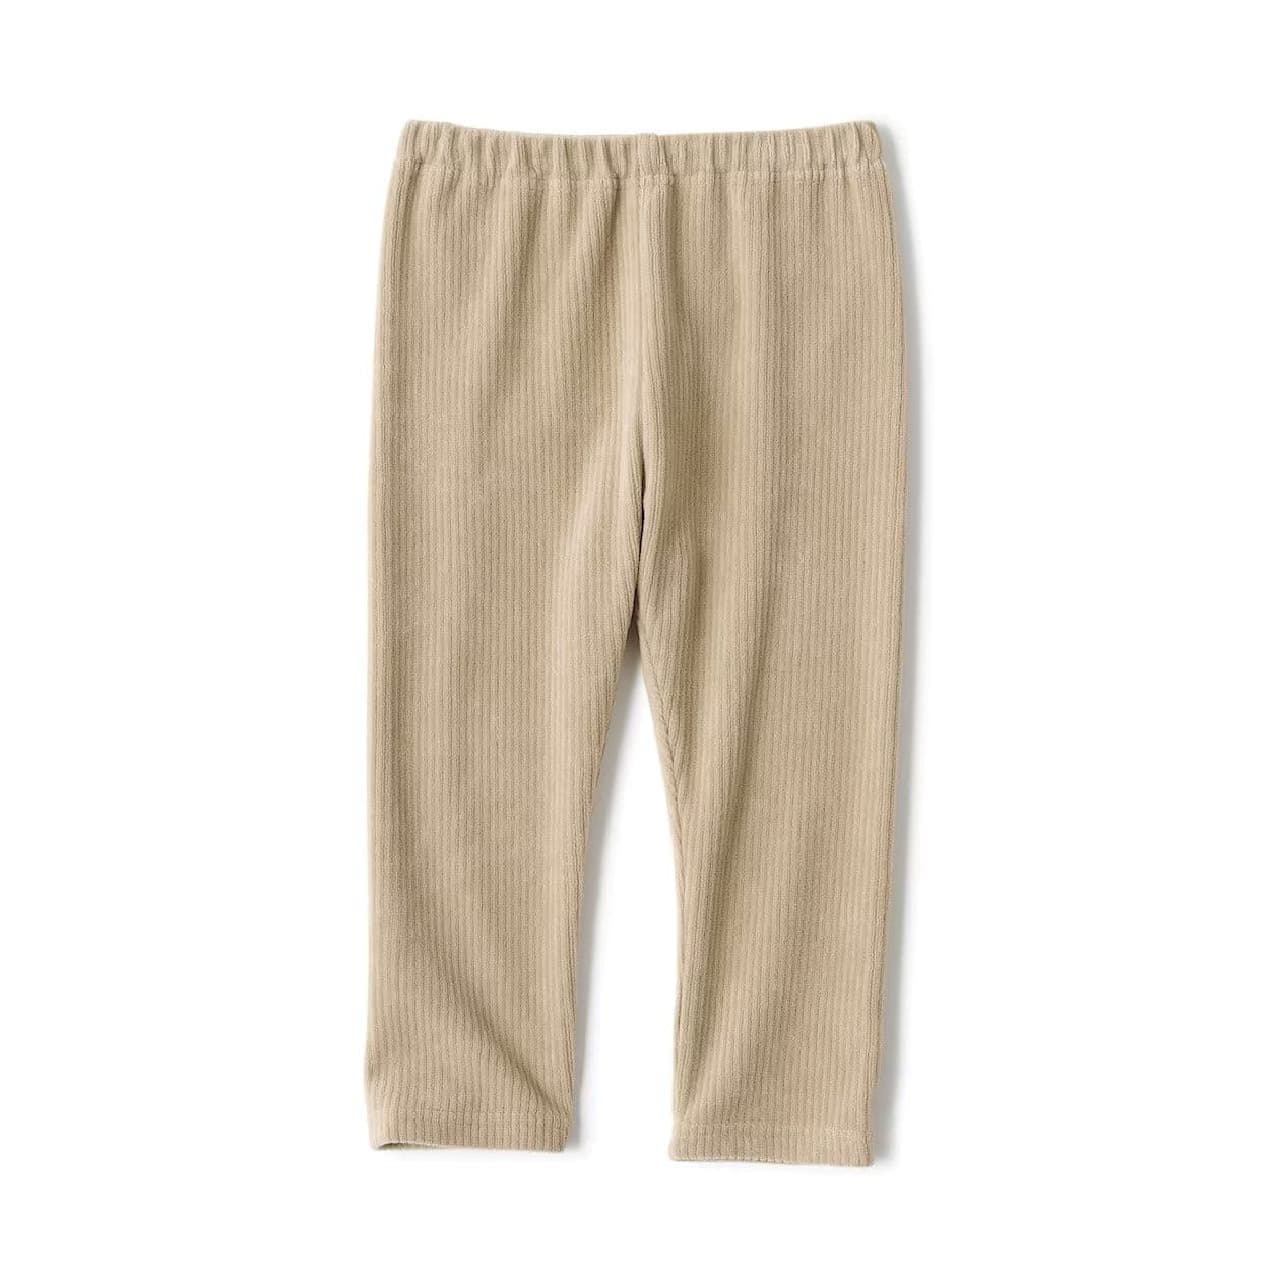 MUJI Leggings and pants that fit your stomach perfectly